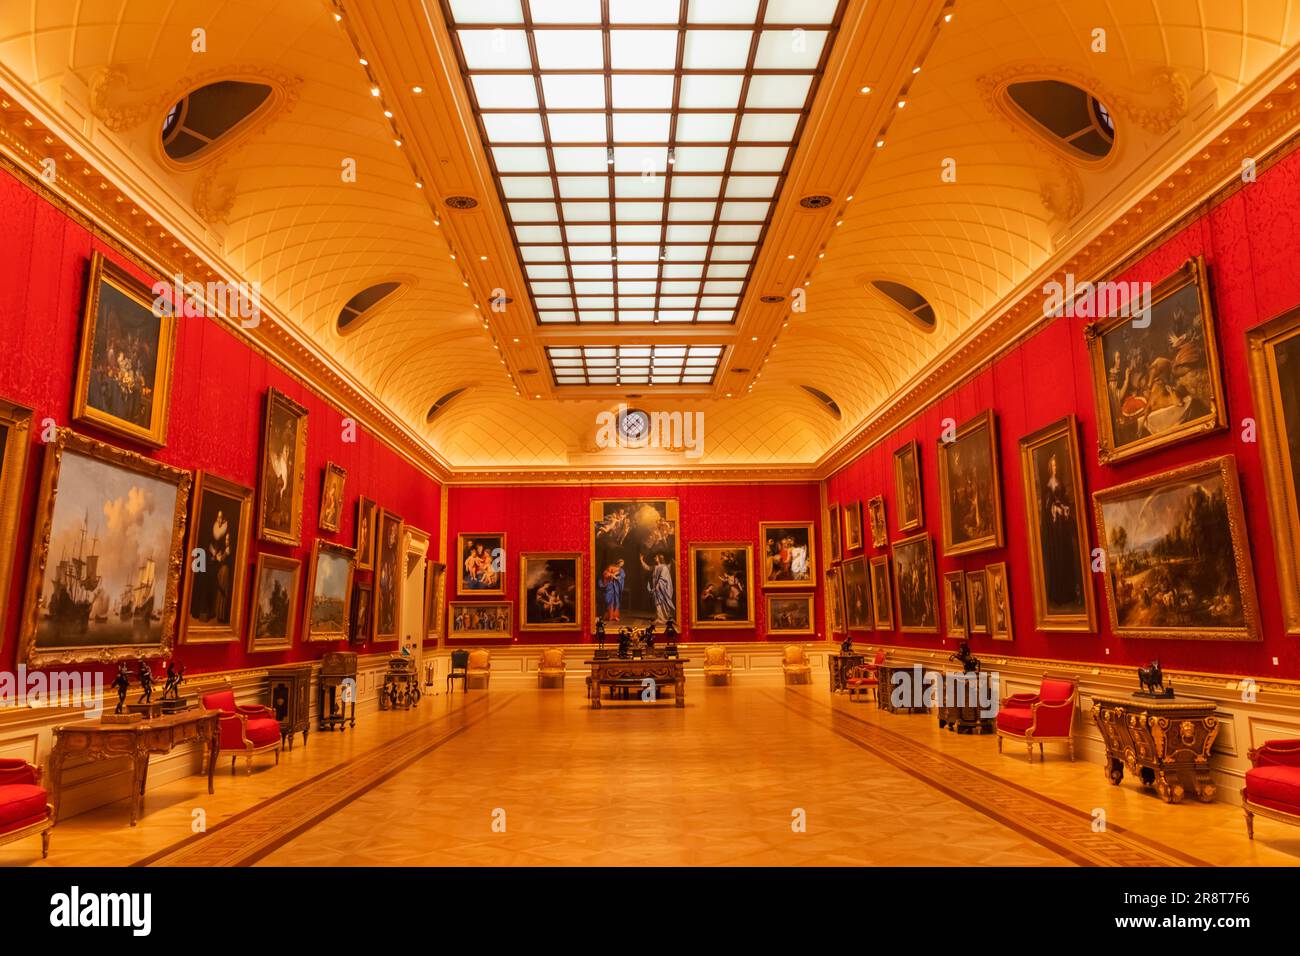 England, London, Heartford House, The Wallace Collection Museum, Interior View of The Great Gallery Stock Photo